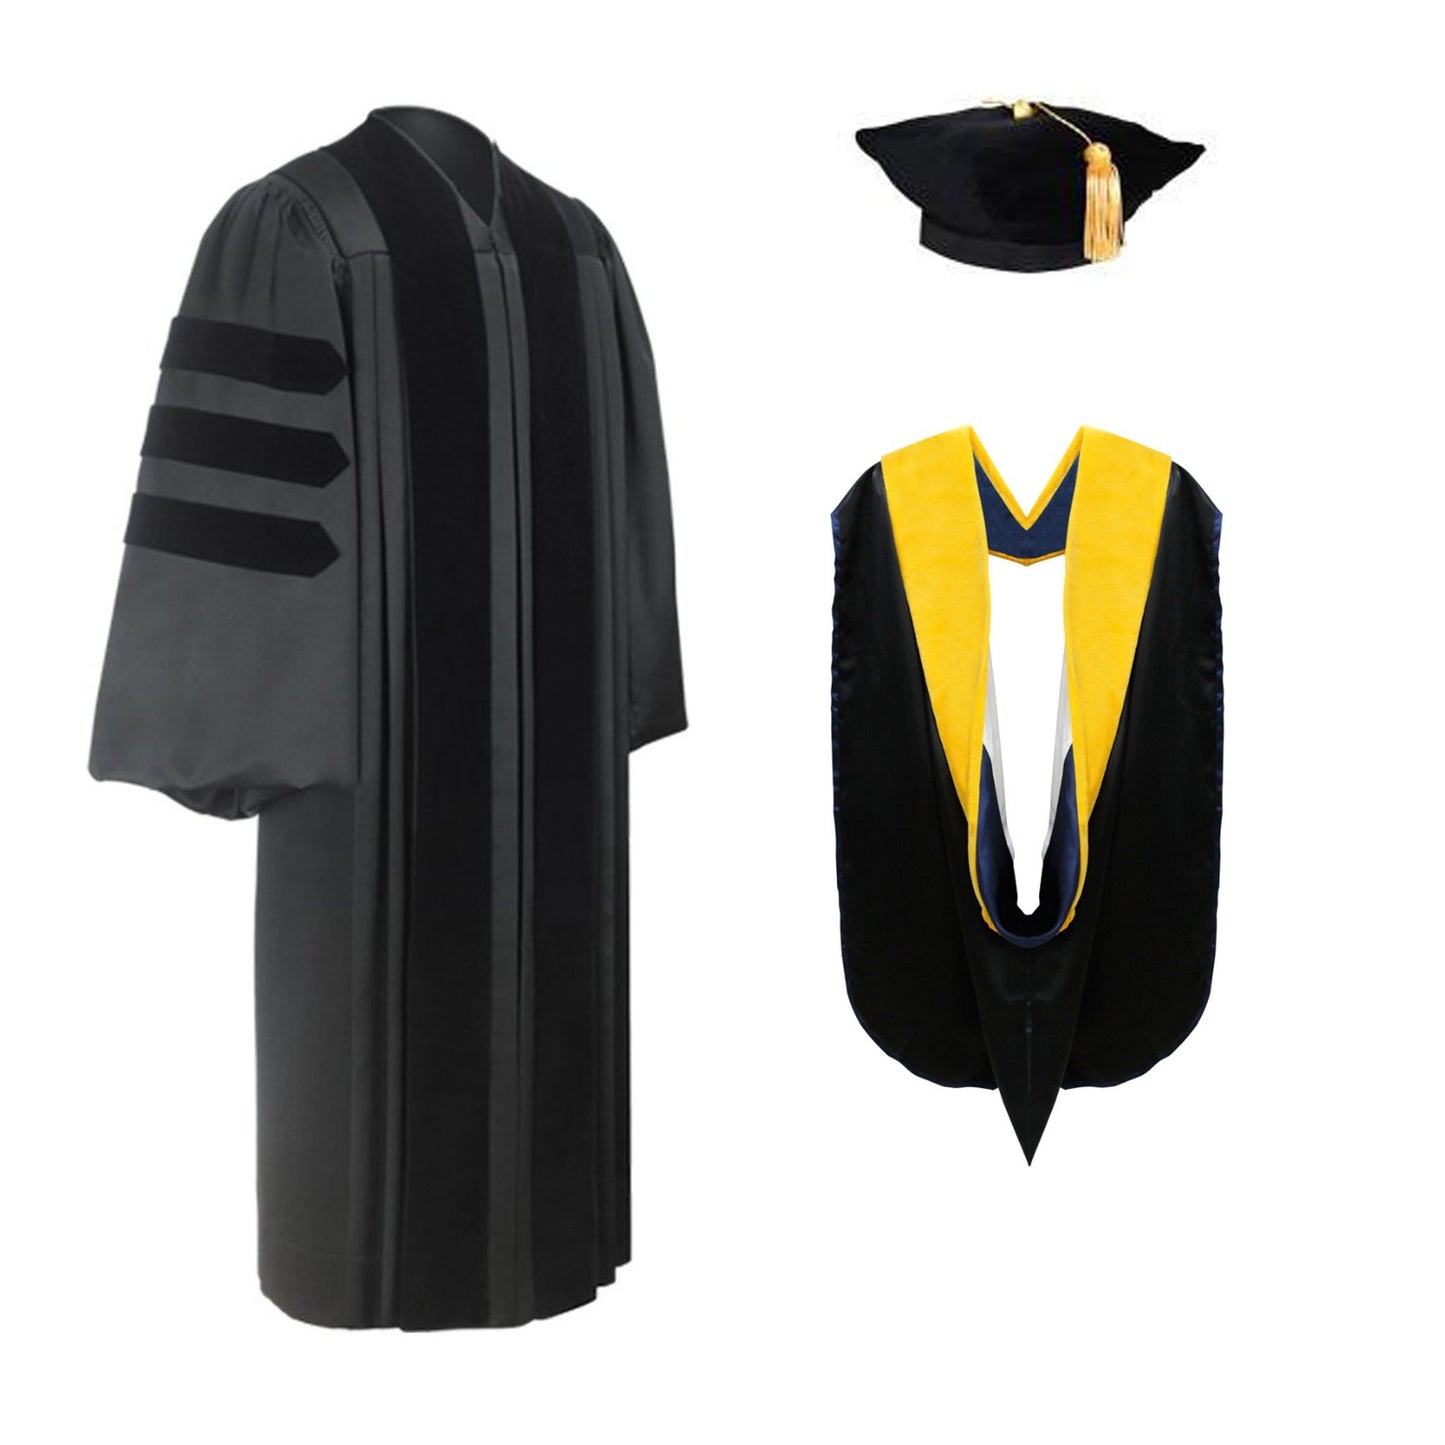 Deluxe Doctoral Graduation Tam, Gown & Hood Package